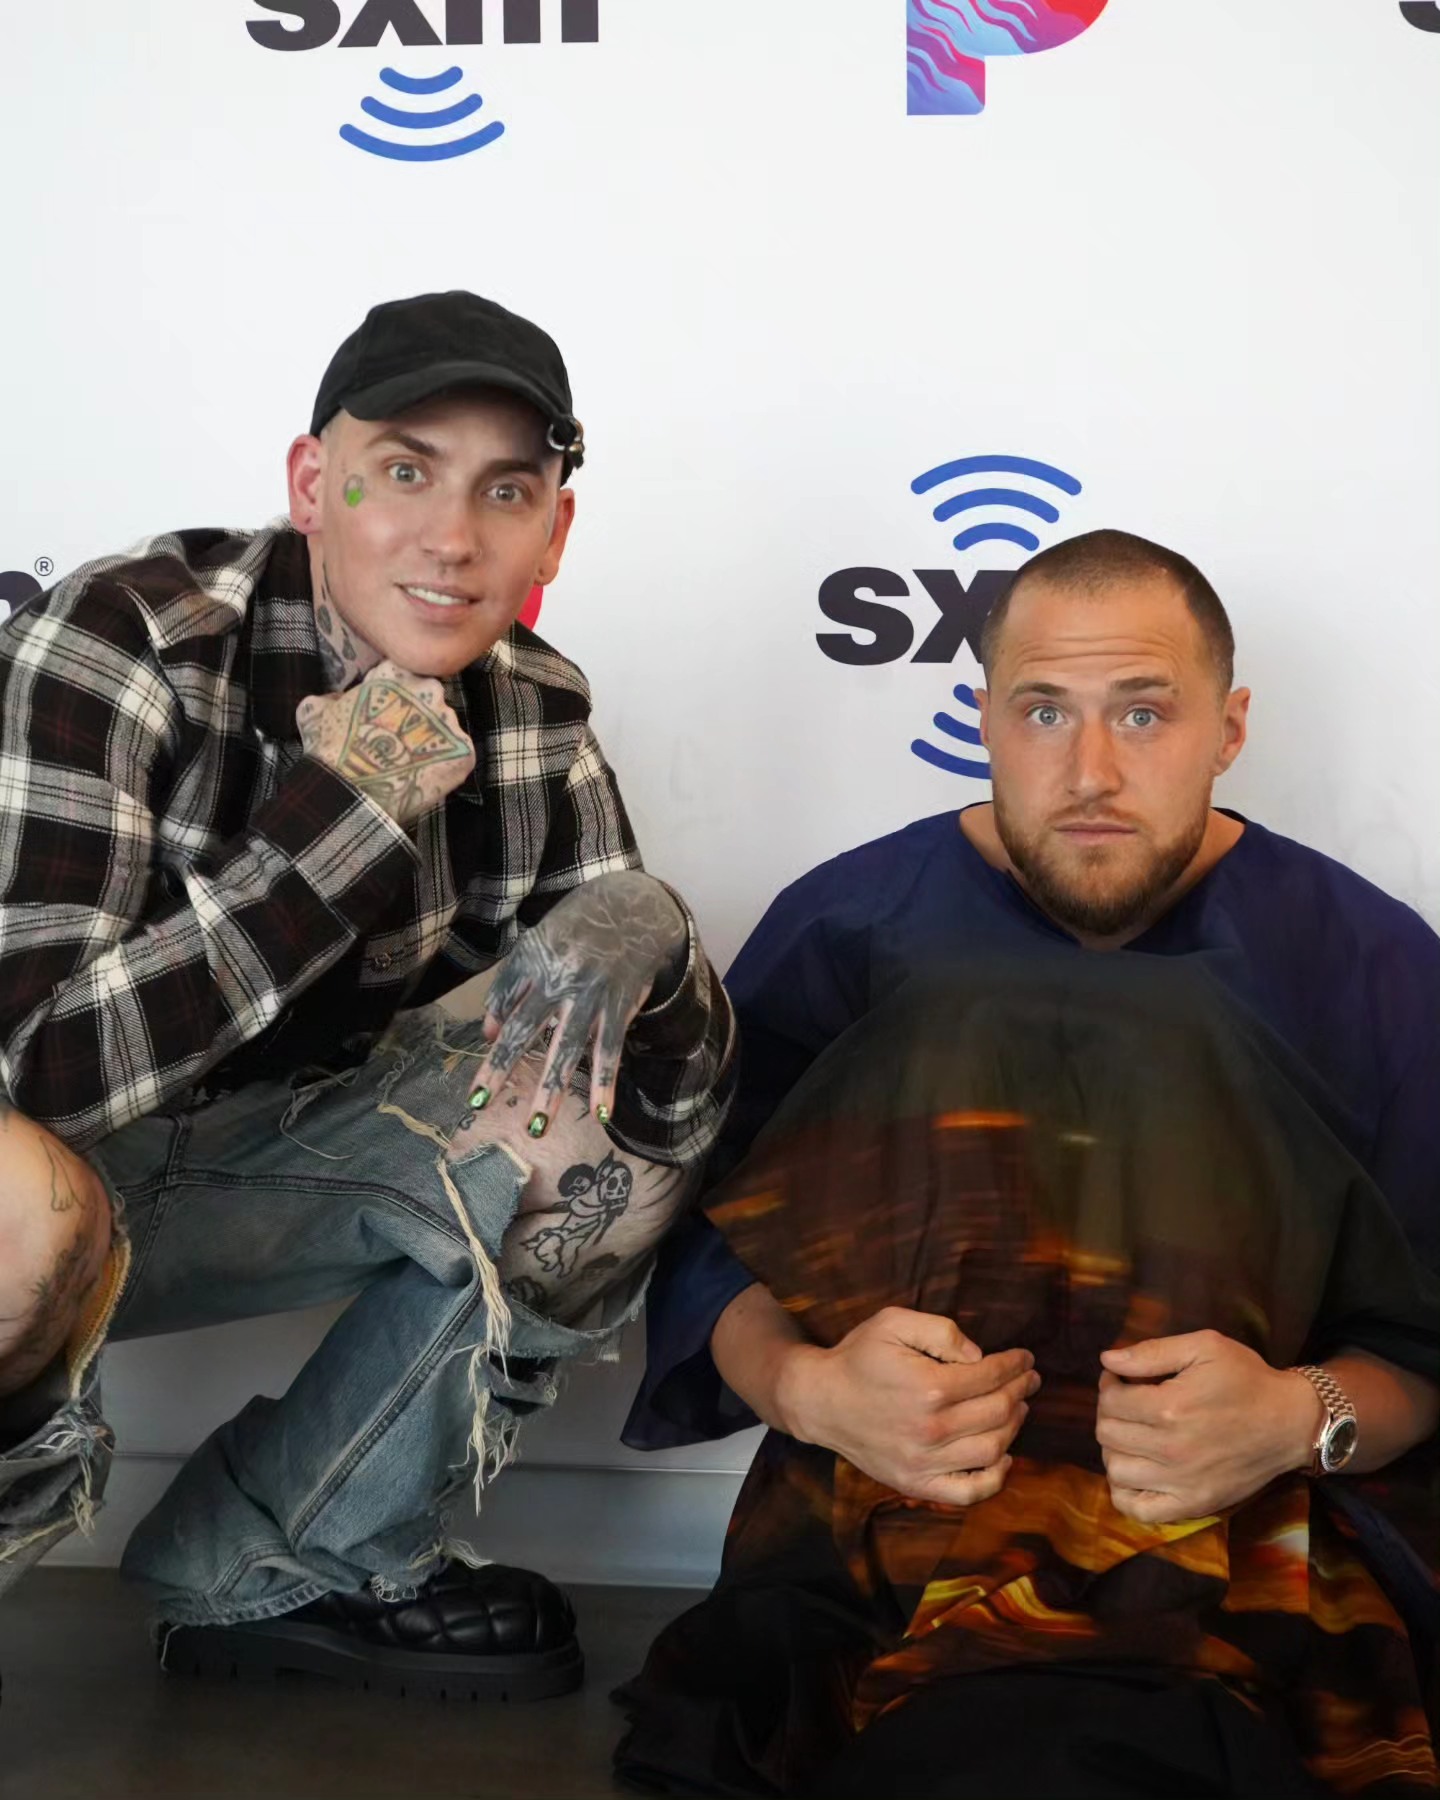 Mike Posner & blackbear at SiriusXM Hist 1 to talk about their new album Mansionz 2.
